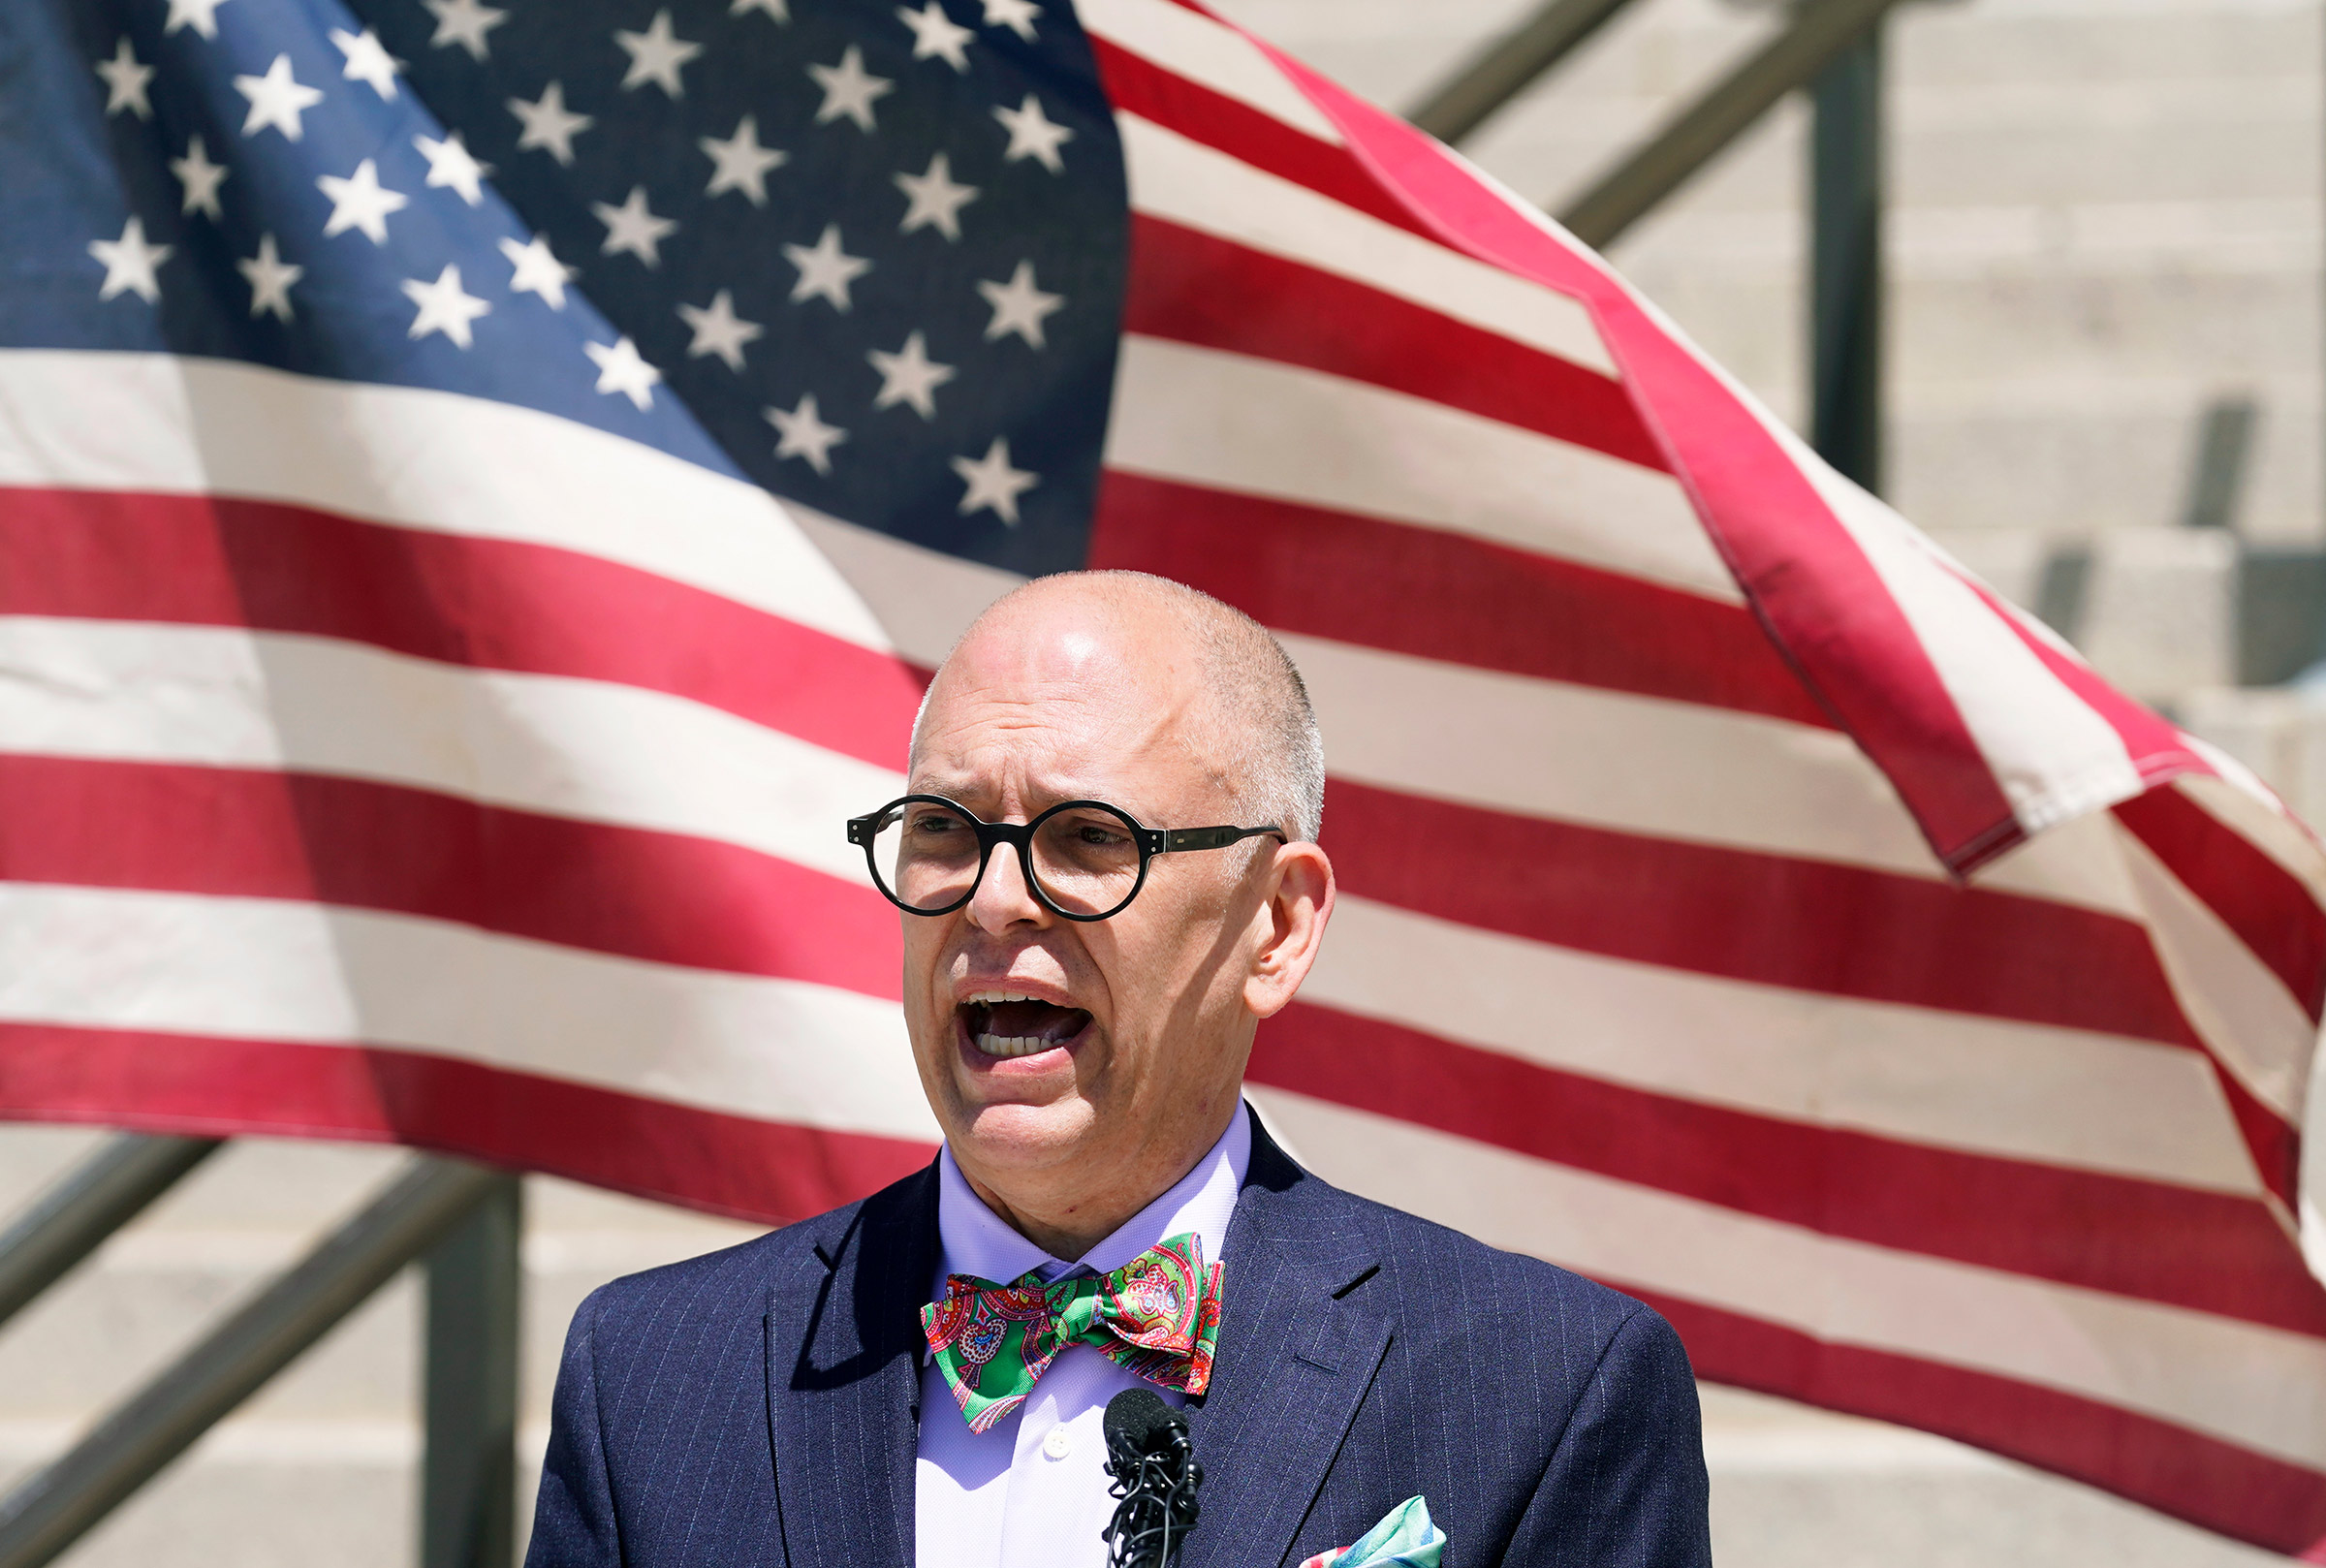 Interview: Jim Obergefell on Same-Sex Marriage Anniversary | Time